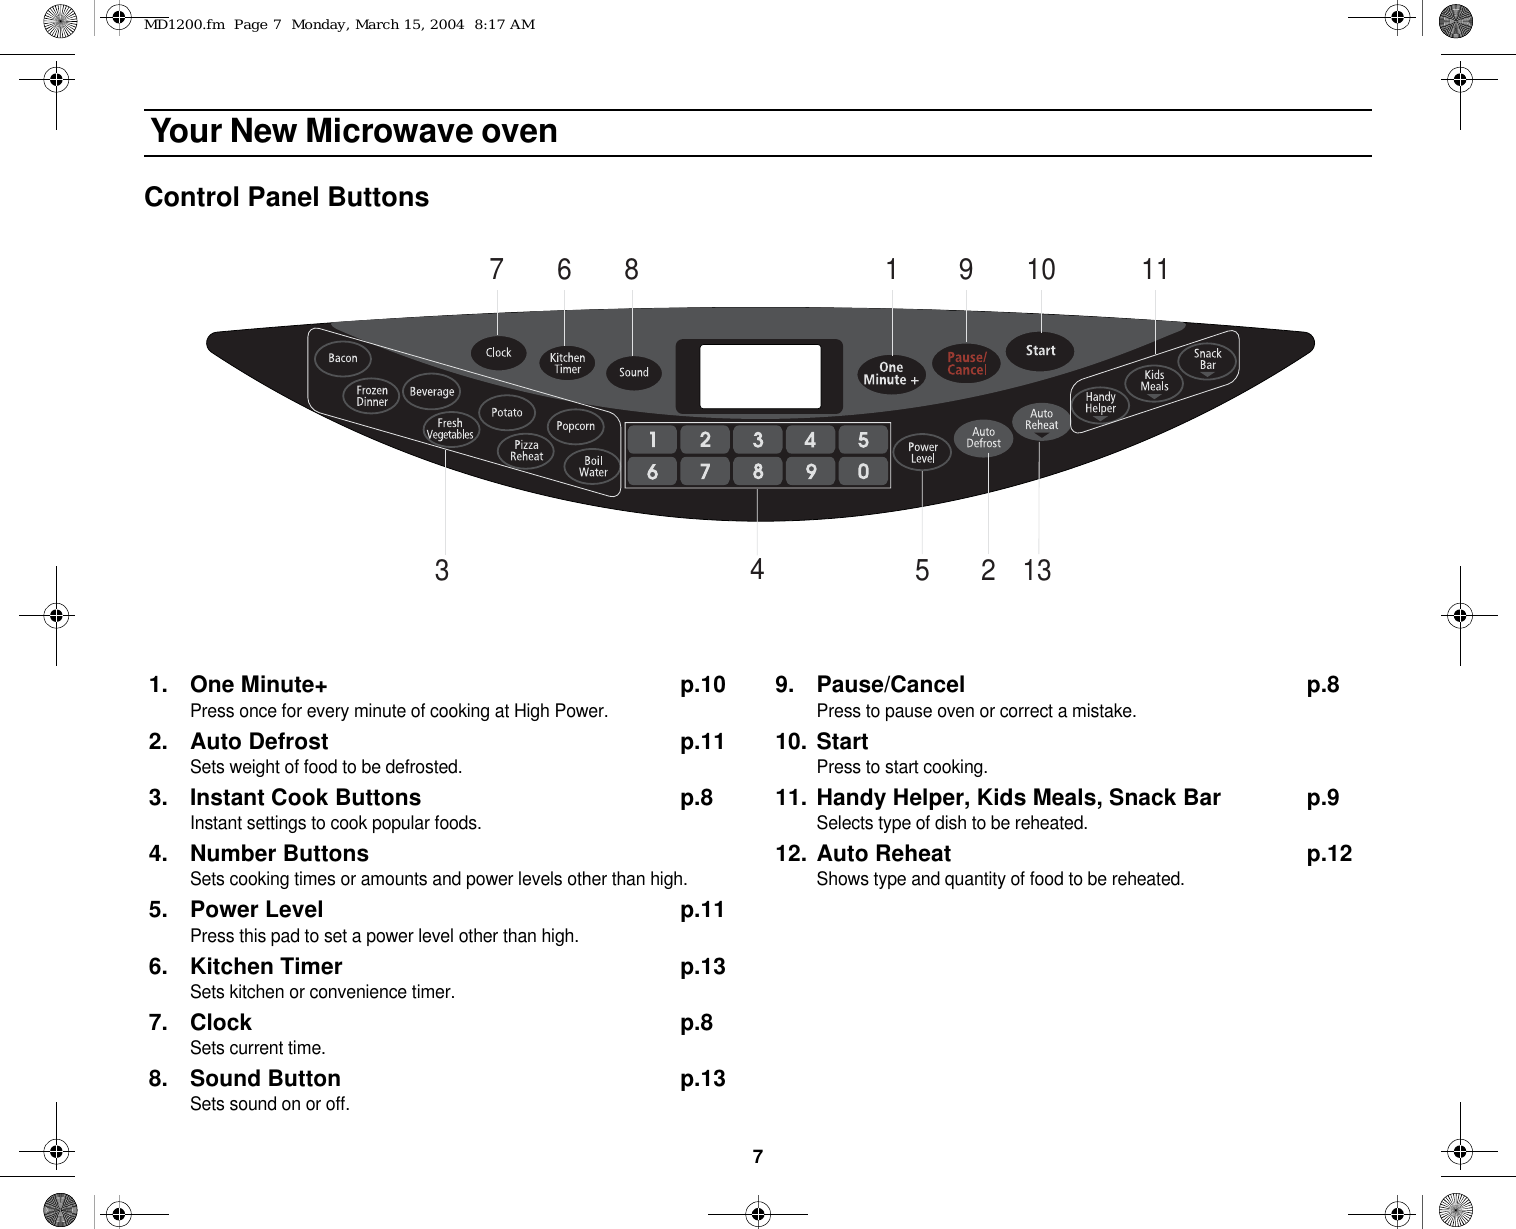 7 Your New Microwave ovenControl Panel Buttons129 10 1167 8135341. One Minute+ p.10Press once for every minute of cooking at High Power.2. Auto Defrost p.11 Sets weight of food to be defrosted.3. Instant Cook Buttons p.8Instant settings to cook popular foods.4. Number ButtonsSets cooking times or amounts and power levels other than high.5. Power Level p.11Press this pad to set a power level other than high.6. Kitchen Timer p.13Sets kitchen or convenience timer.7. Clock p.8Sets current time.8. Sound Button p.13Sets sound on or off.9. Pause/Cancel p.8Press to pause oven or correct a mistake.10. StartPress to start cooking.11. Handy Helper, Kids Meals, Snack Bar p.9Selects type of dish to be reheated.12. Auto Reheat p.12Shows type and quantity of food to be reheated.MD1200.fm  Page 7  Monday, March 15, 2004  8:17 AM